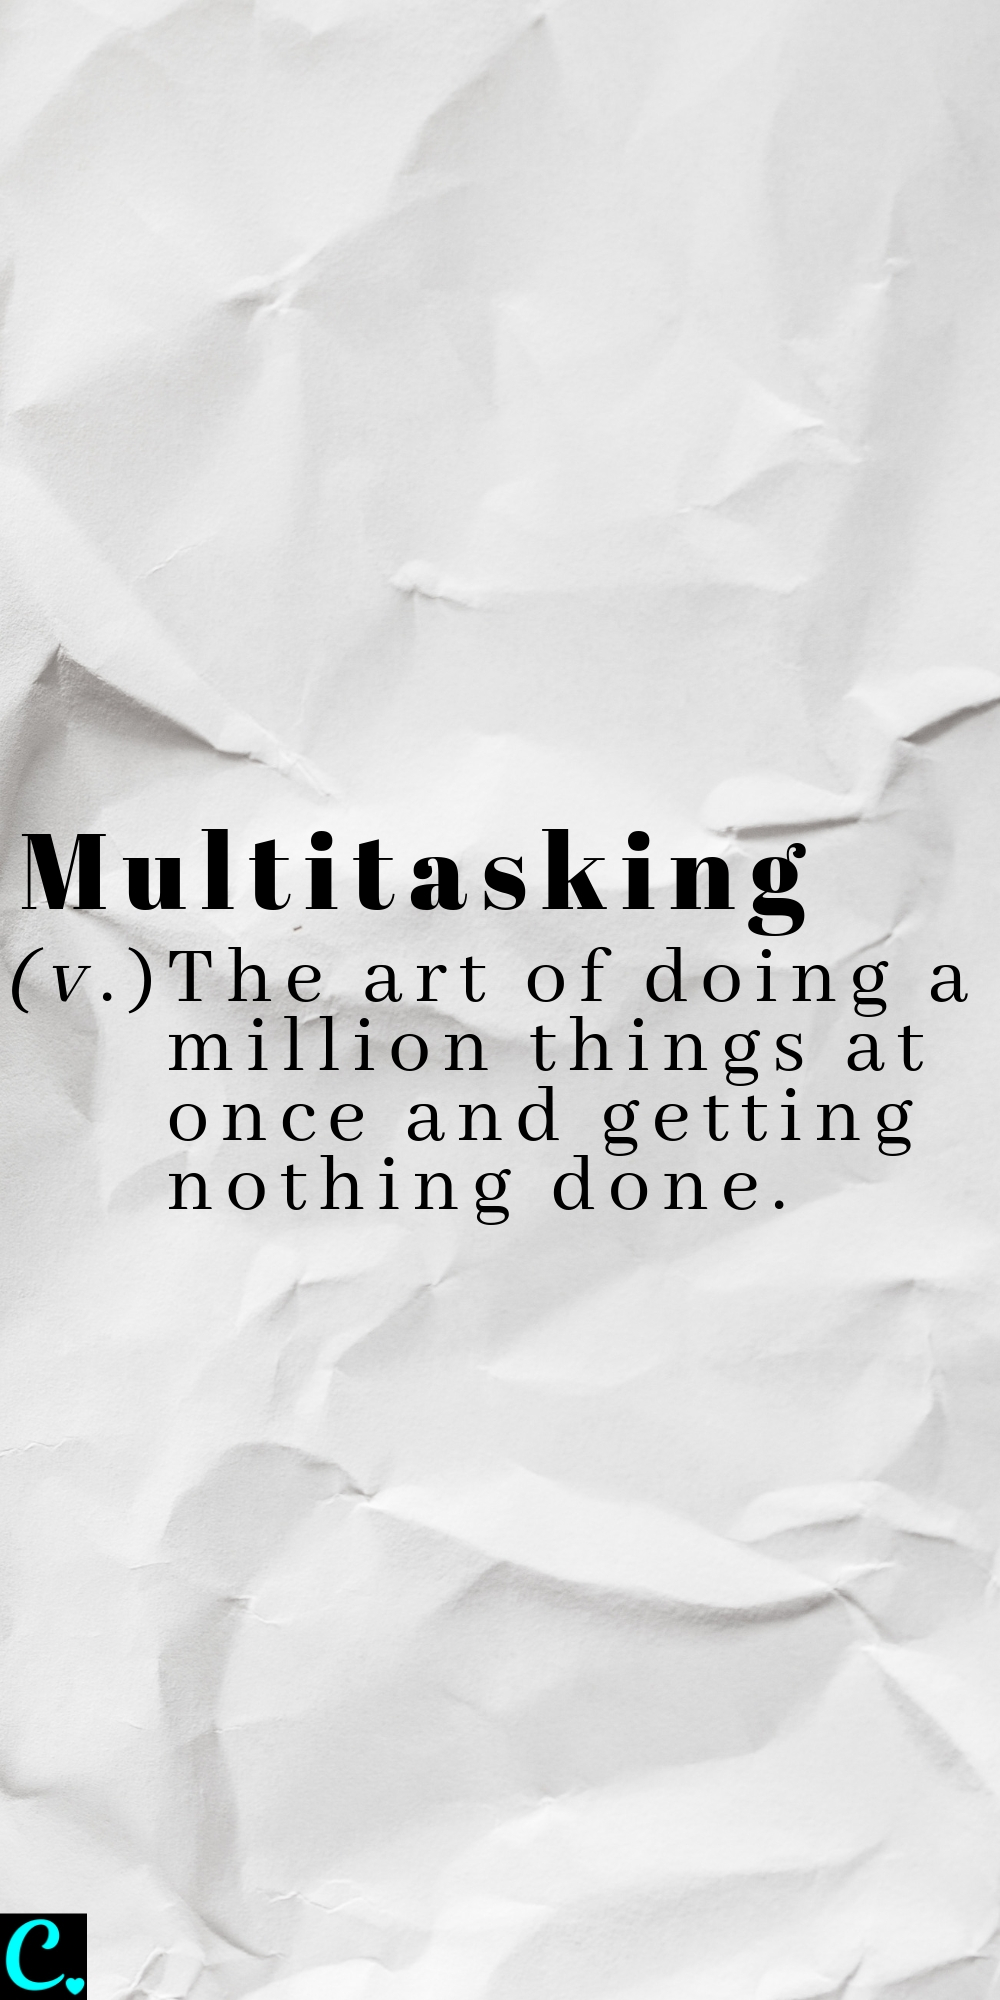 Definition of Multitasking - The art of doing a million things at once and getting nothing done | productivity tips | work smarter | get more done in less time #multitaskingquotes #humorquotes #funnyquotes #multitasking #productivity #productivitytips